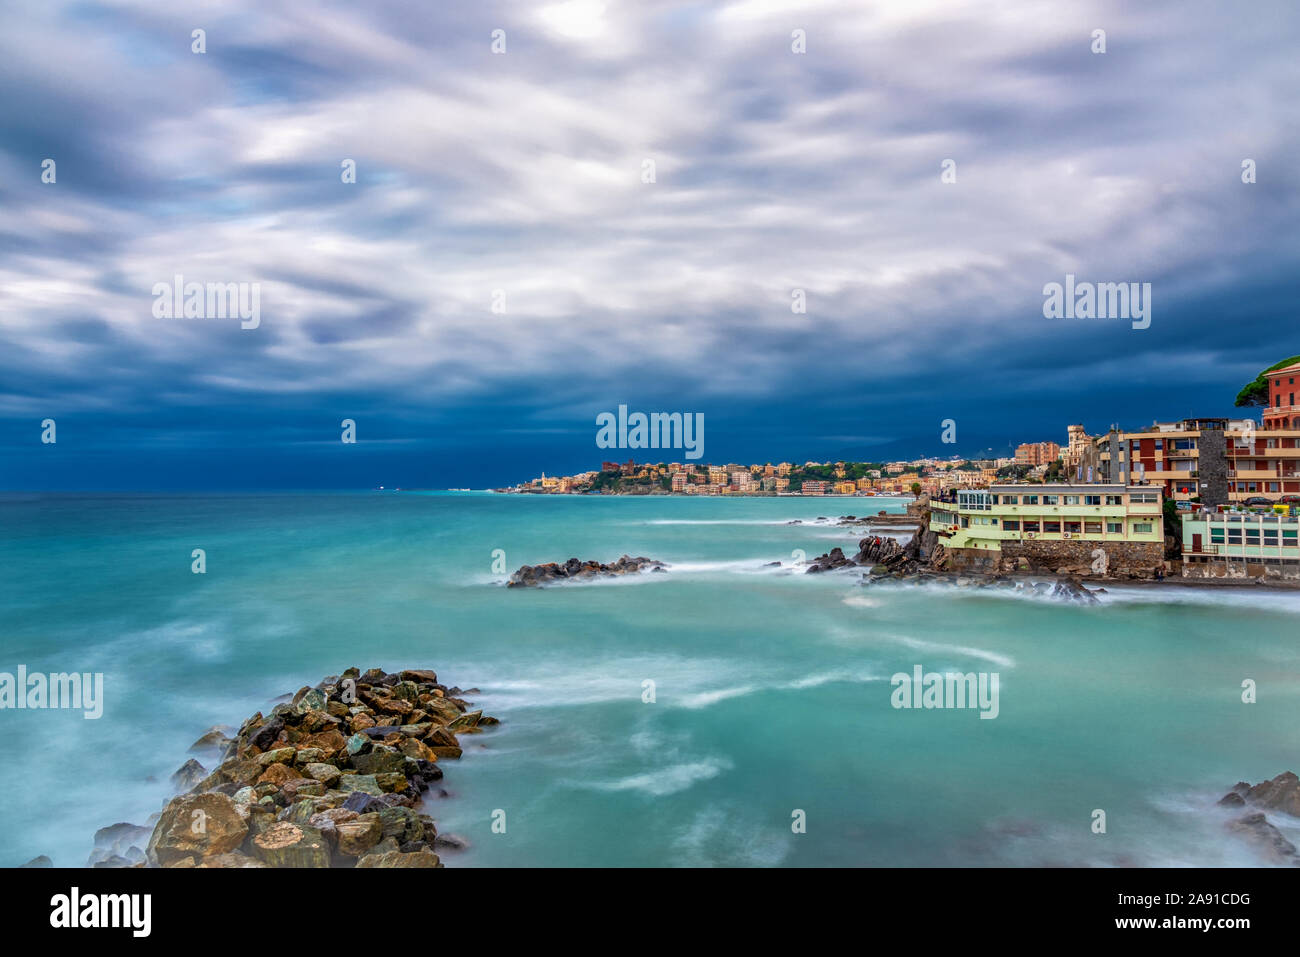 Picturesque view of the Italian coastline with colorful waterfront buildings overlooking the Mediterranean on an overcast cloudy blue sky day Stock Photo